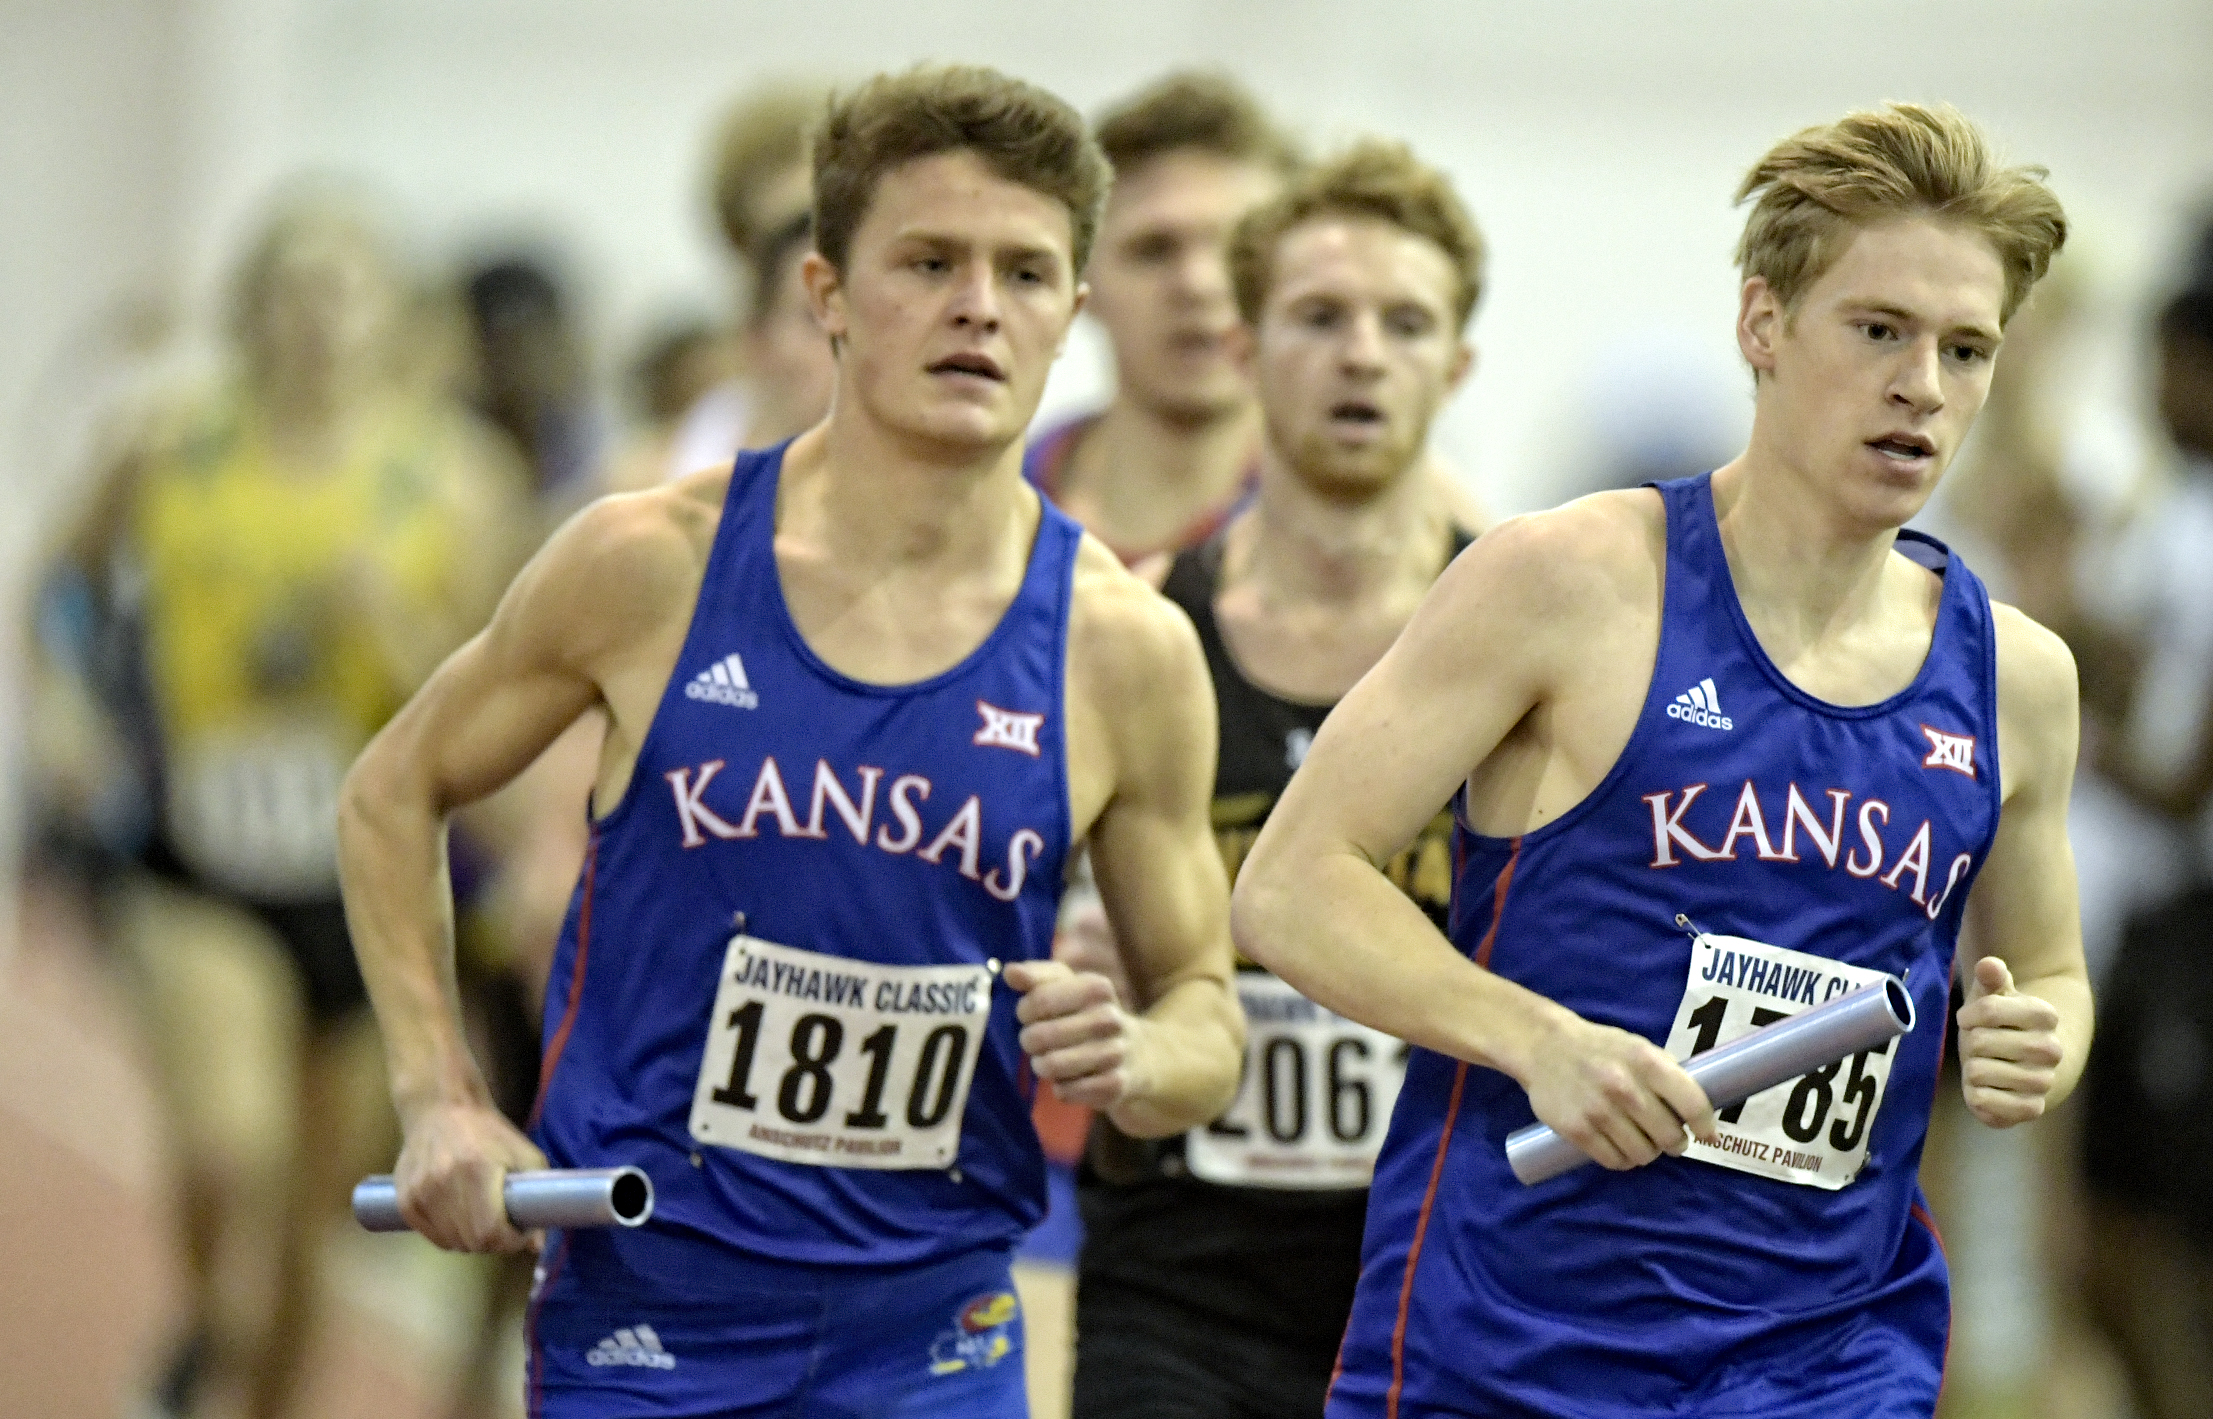 Some of Nation's Best to Compete Friday at Jayhawk Classic